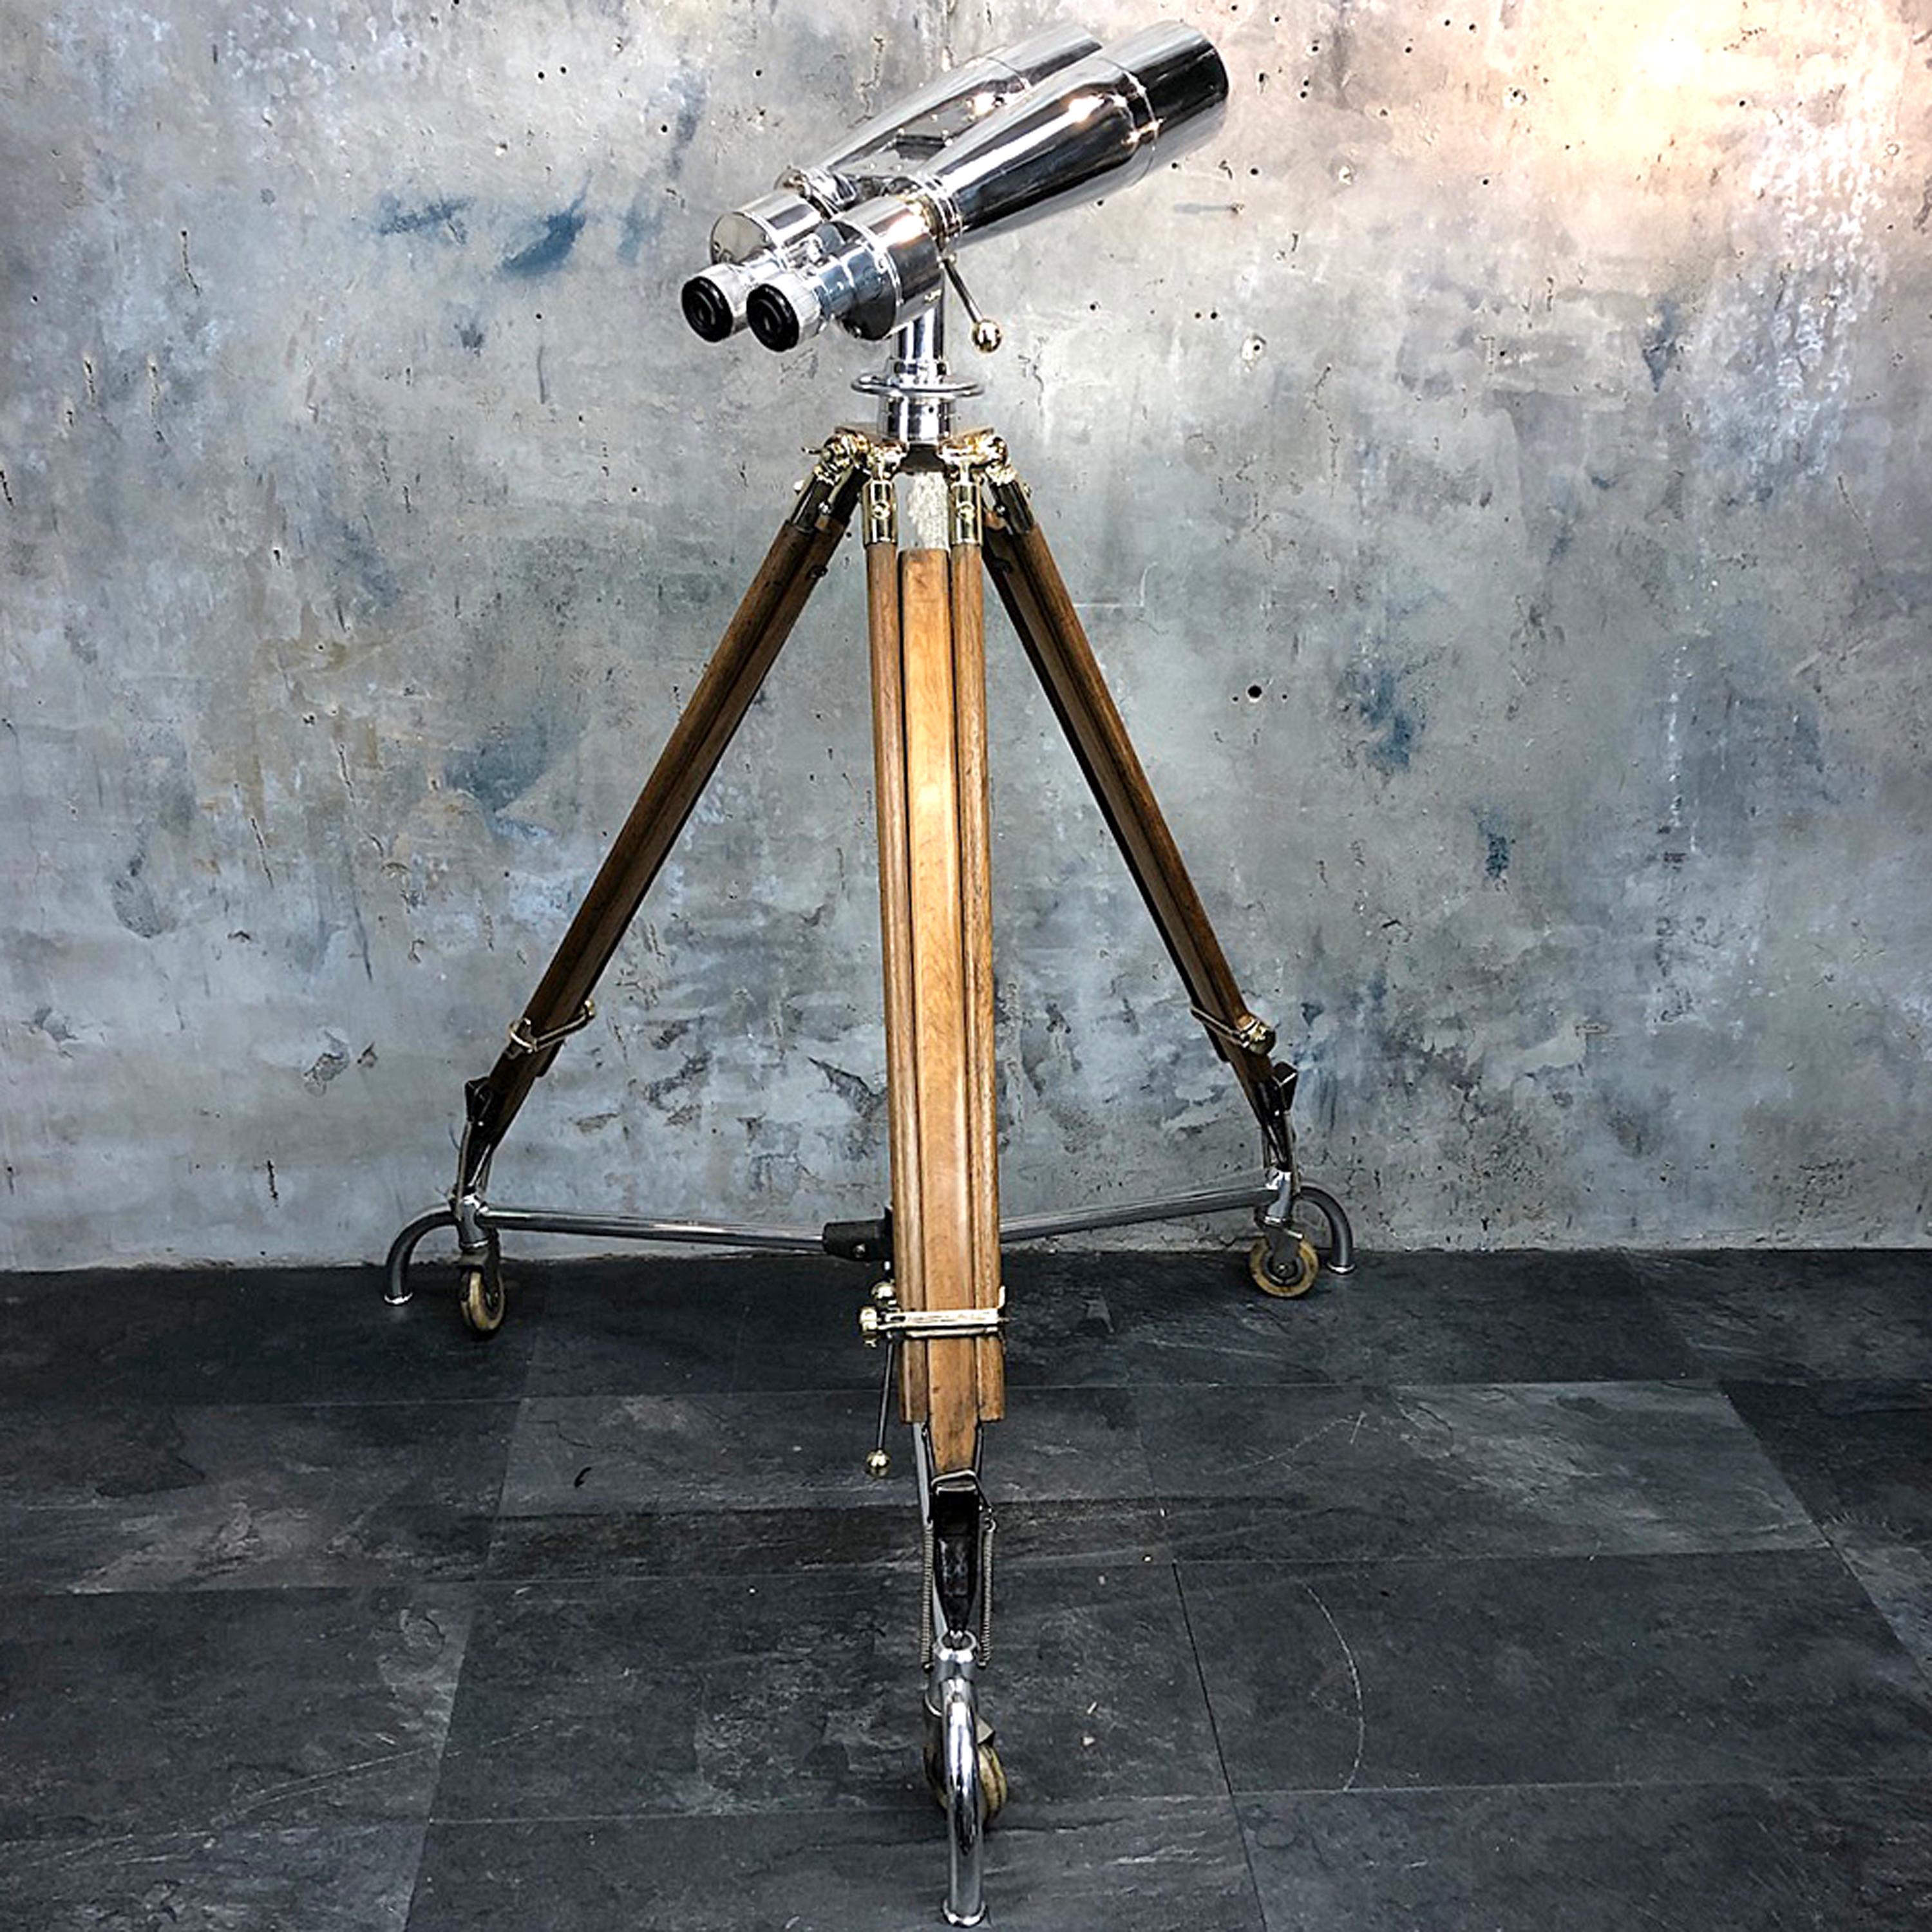 Japanese Fuji Meibo observation binoculars 15 x 80, 4 degree field of view.

A large pair of Japanese ex-navy observation binoculars mounted on an antique 1940s ERYL & S bronze, brass and hardwood tripod signed and stamped with the British Ministry